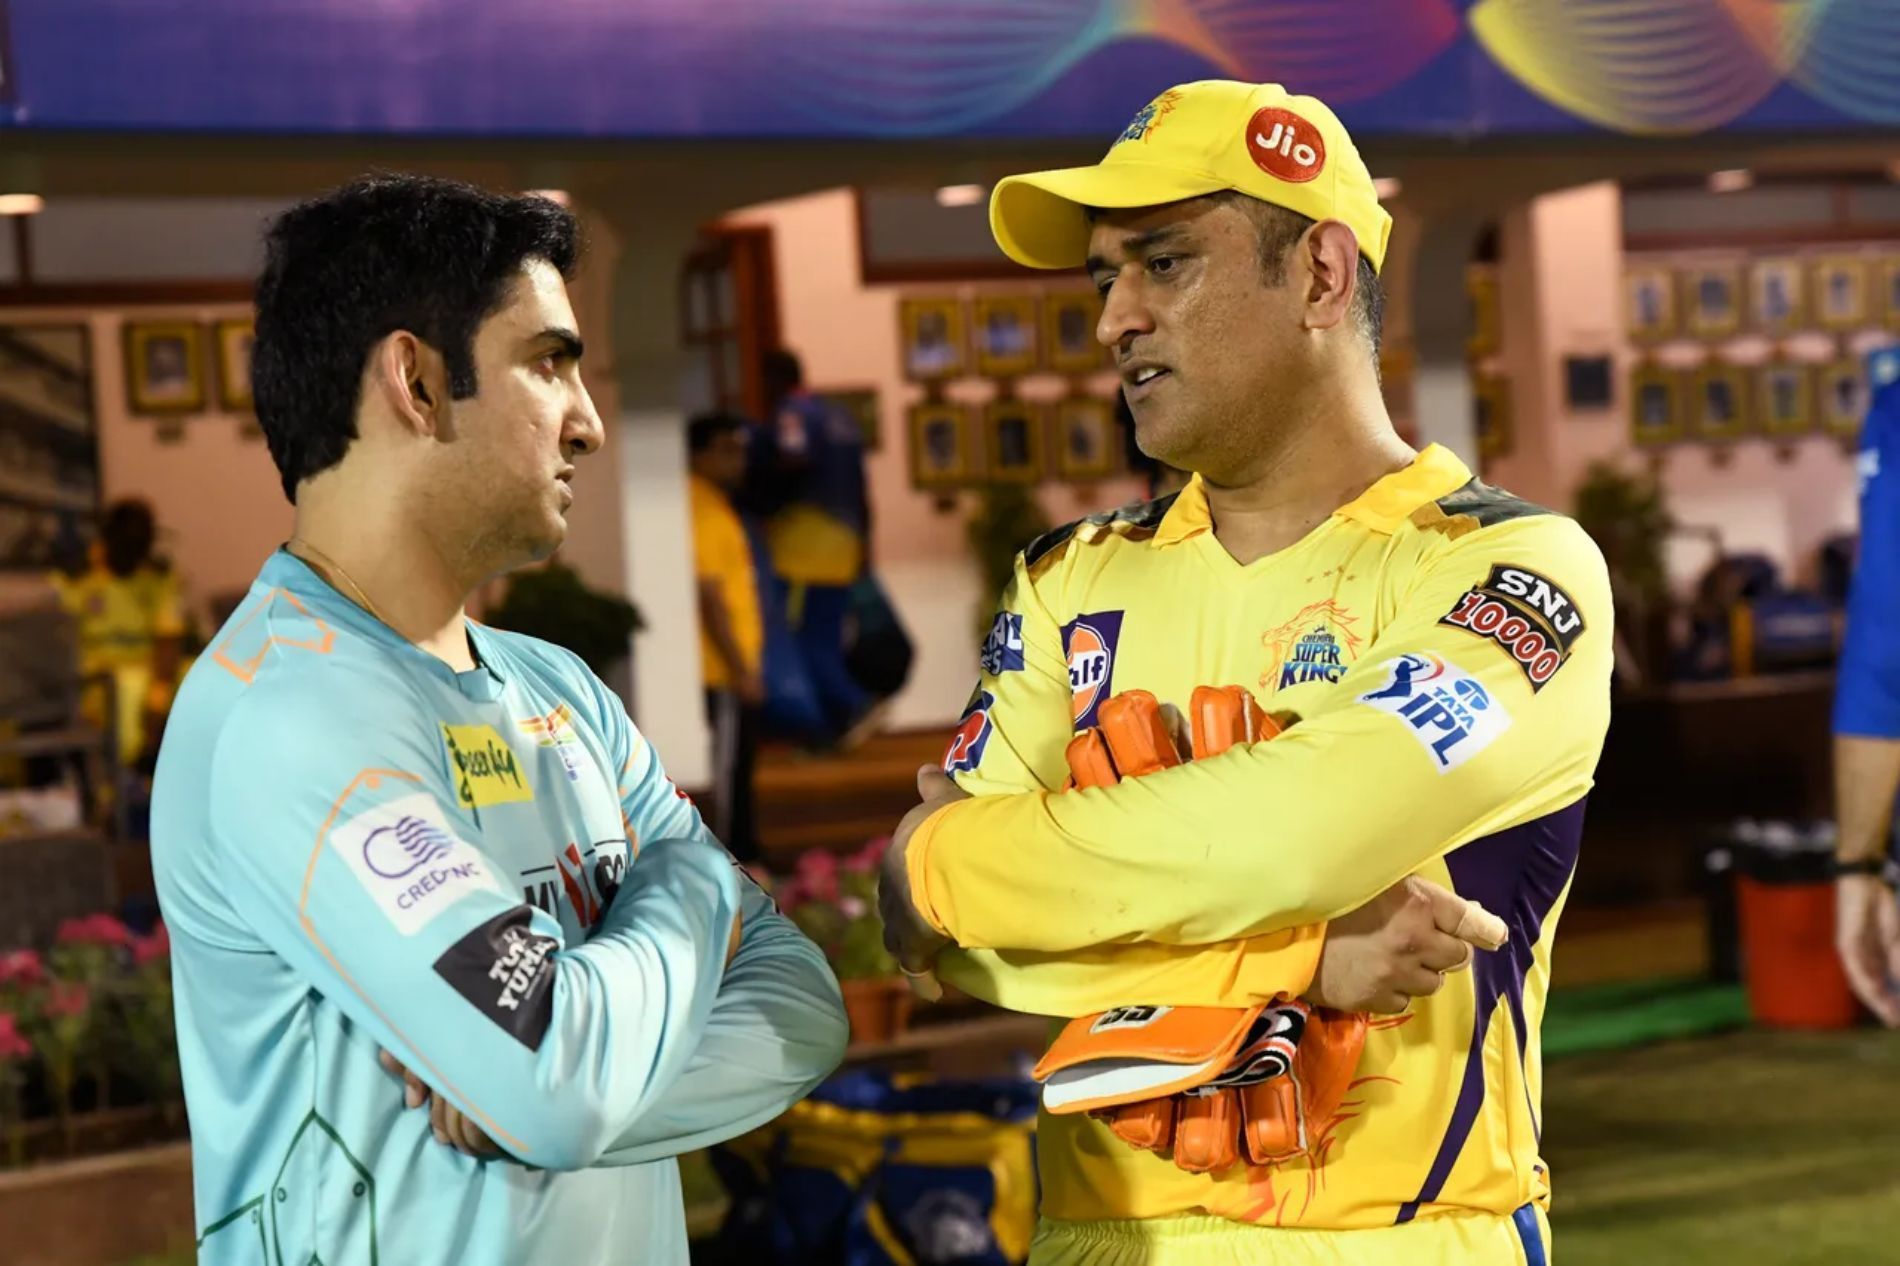 What could Gautam Gambhir and MS Dhoni possibly be discussing? The World Cup-winning duo chat after the Match 7 between LSG and CSK.